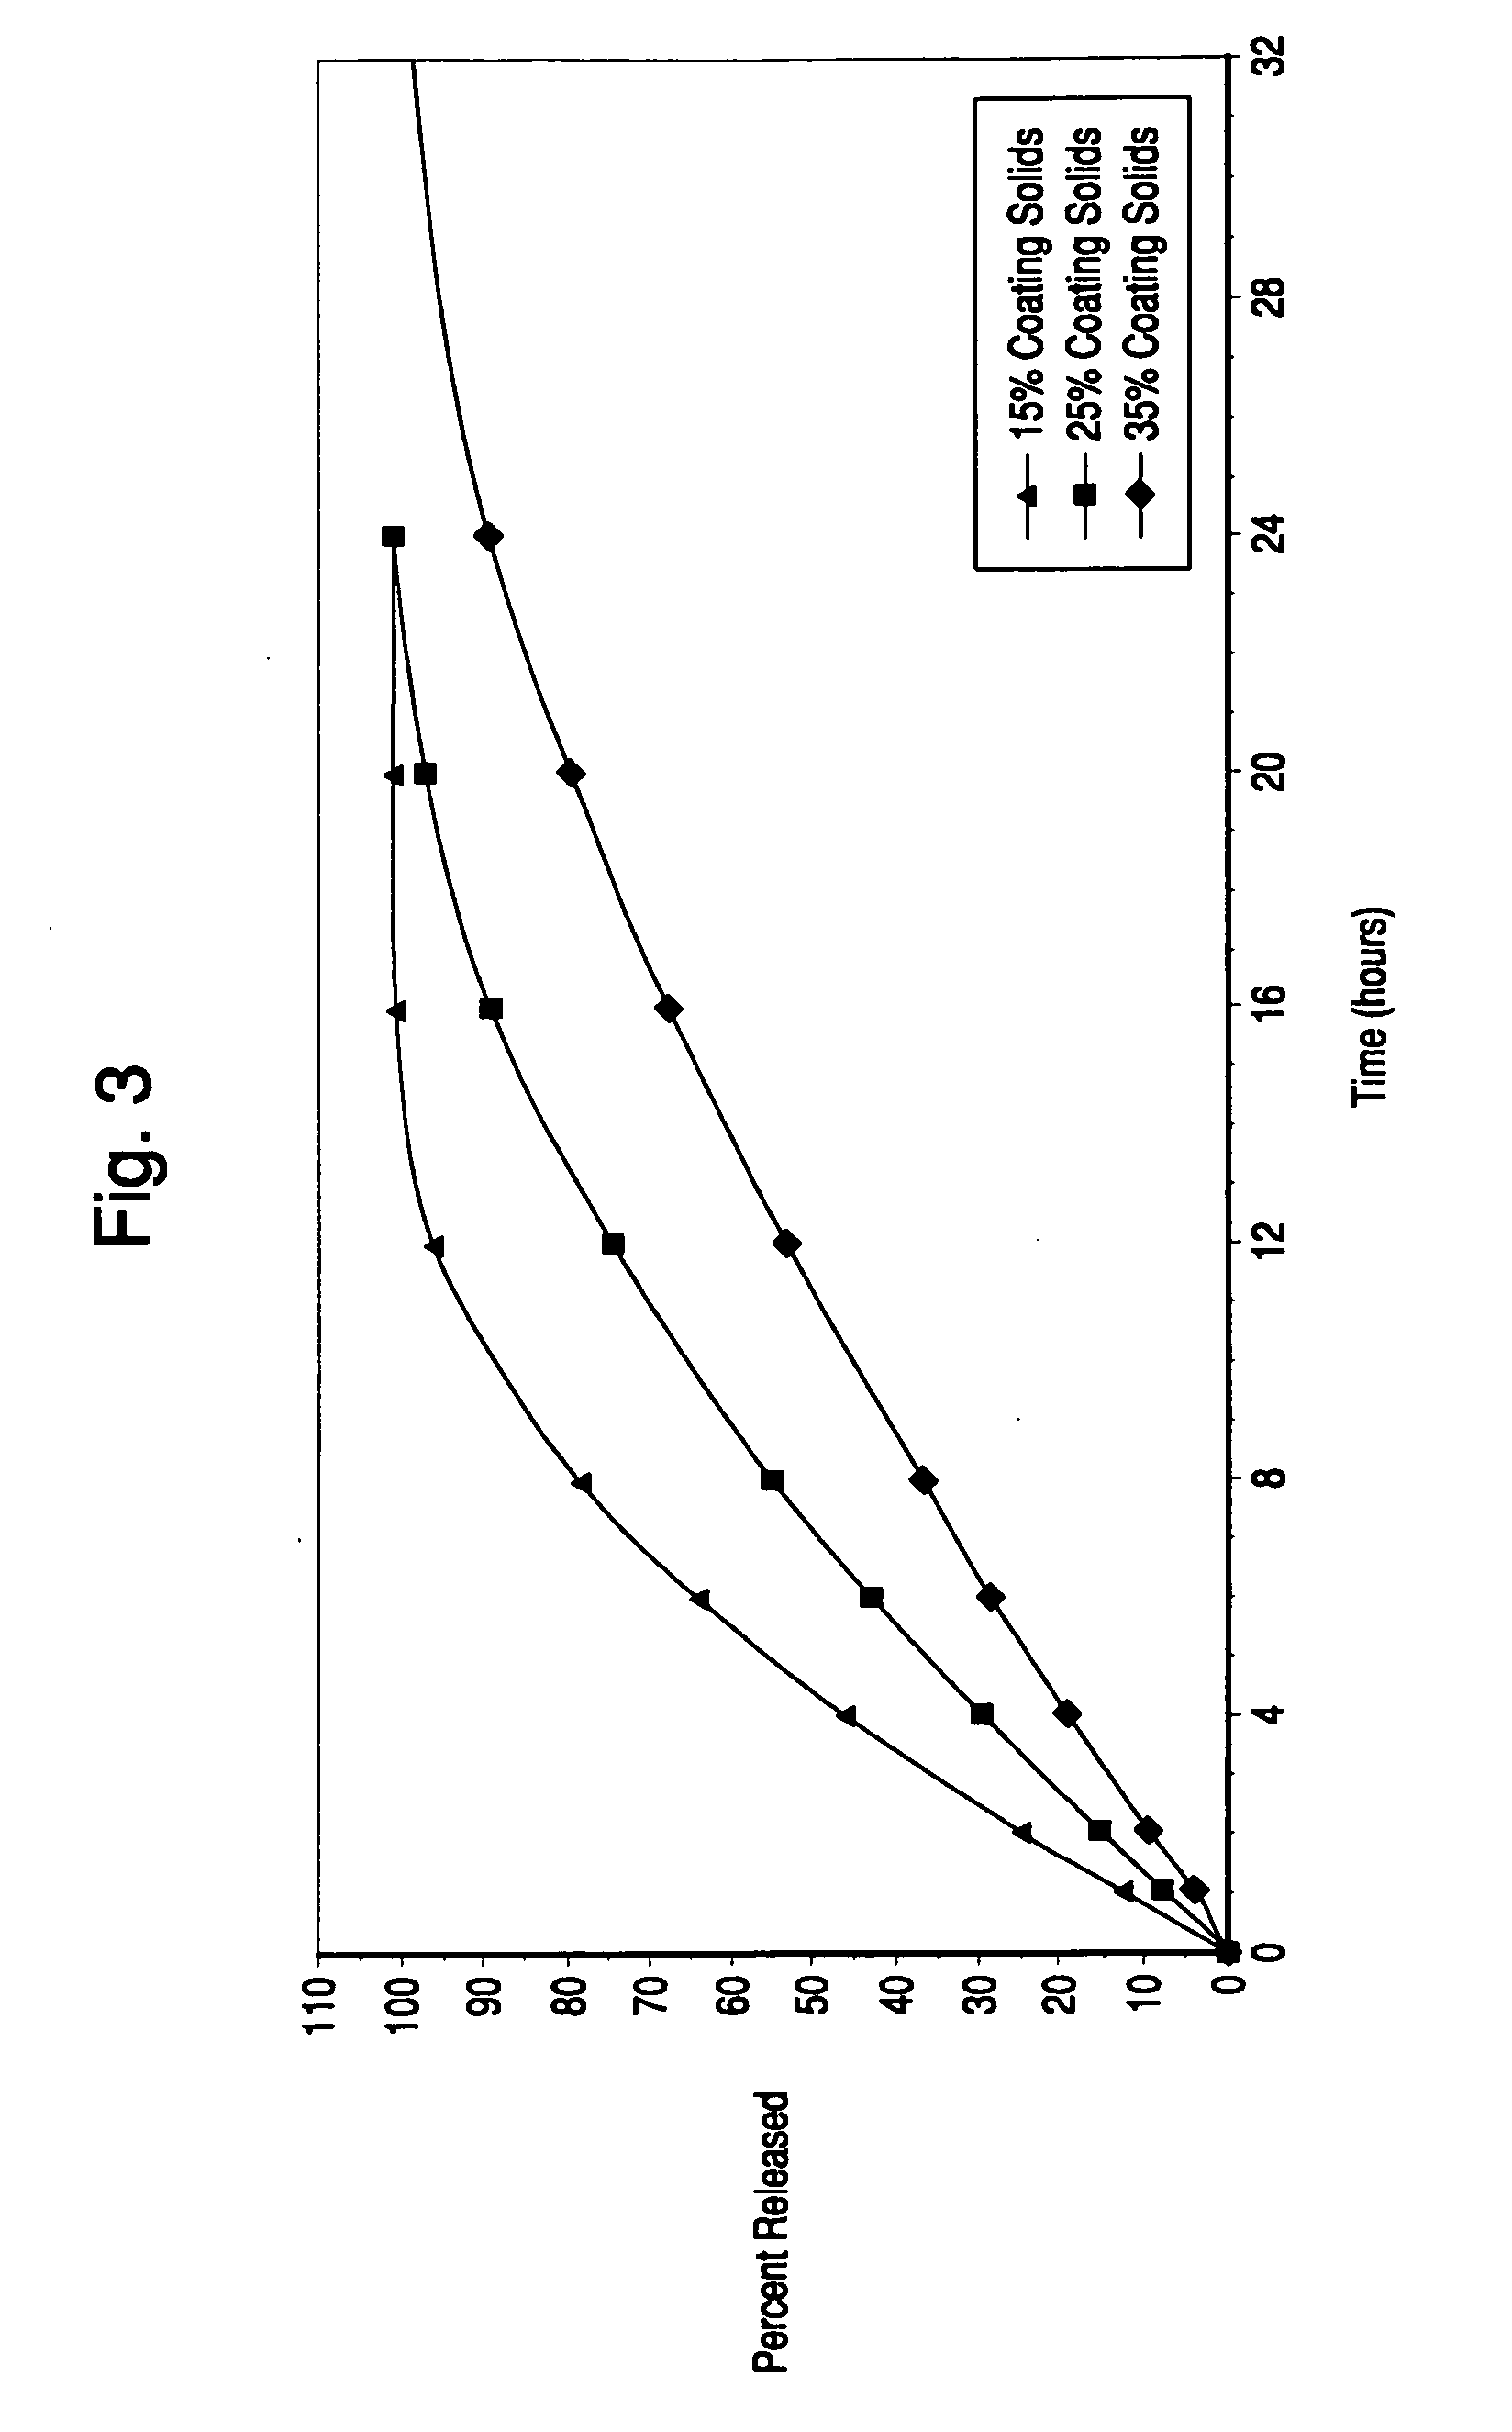 Orally administrable extended release pellet and tablet formulations of a highly water soluble compound